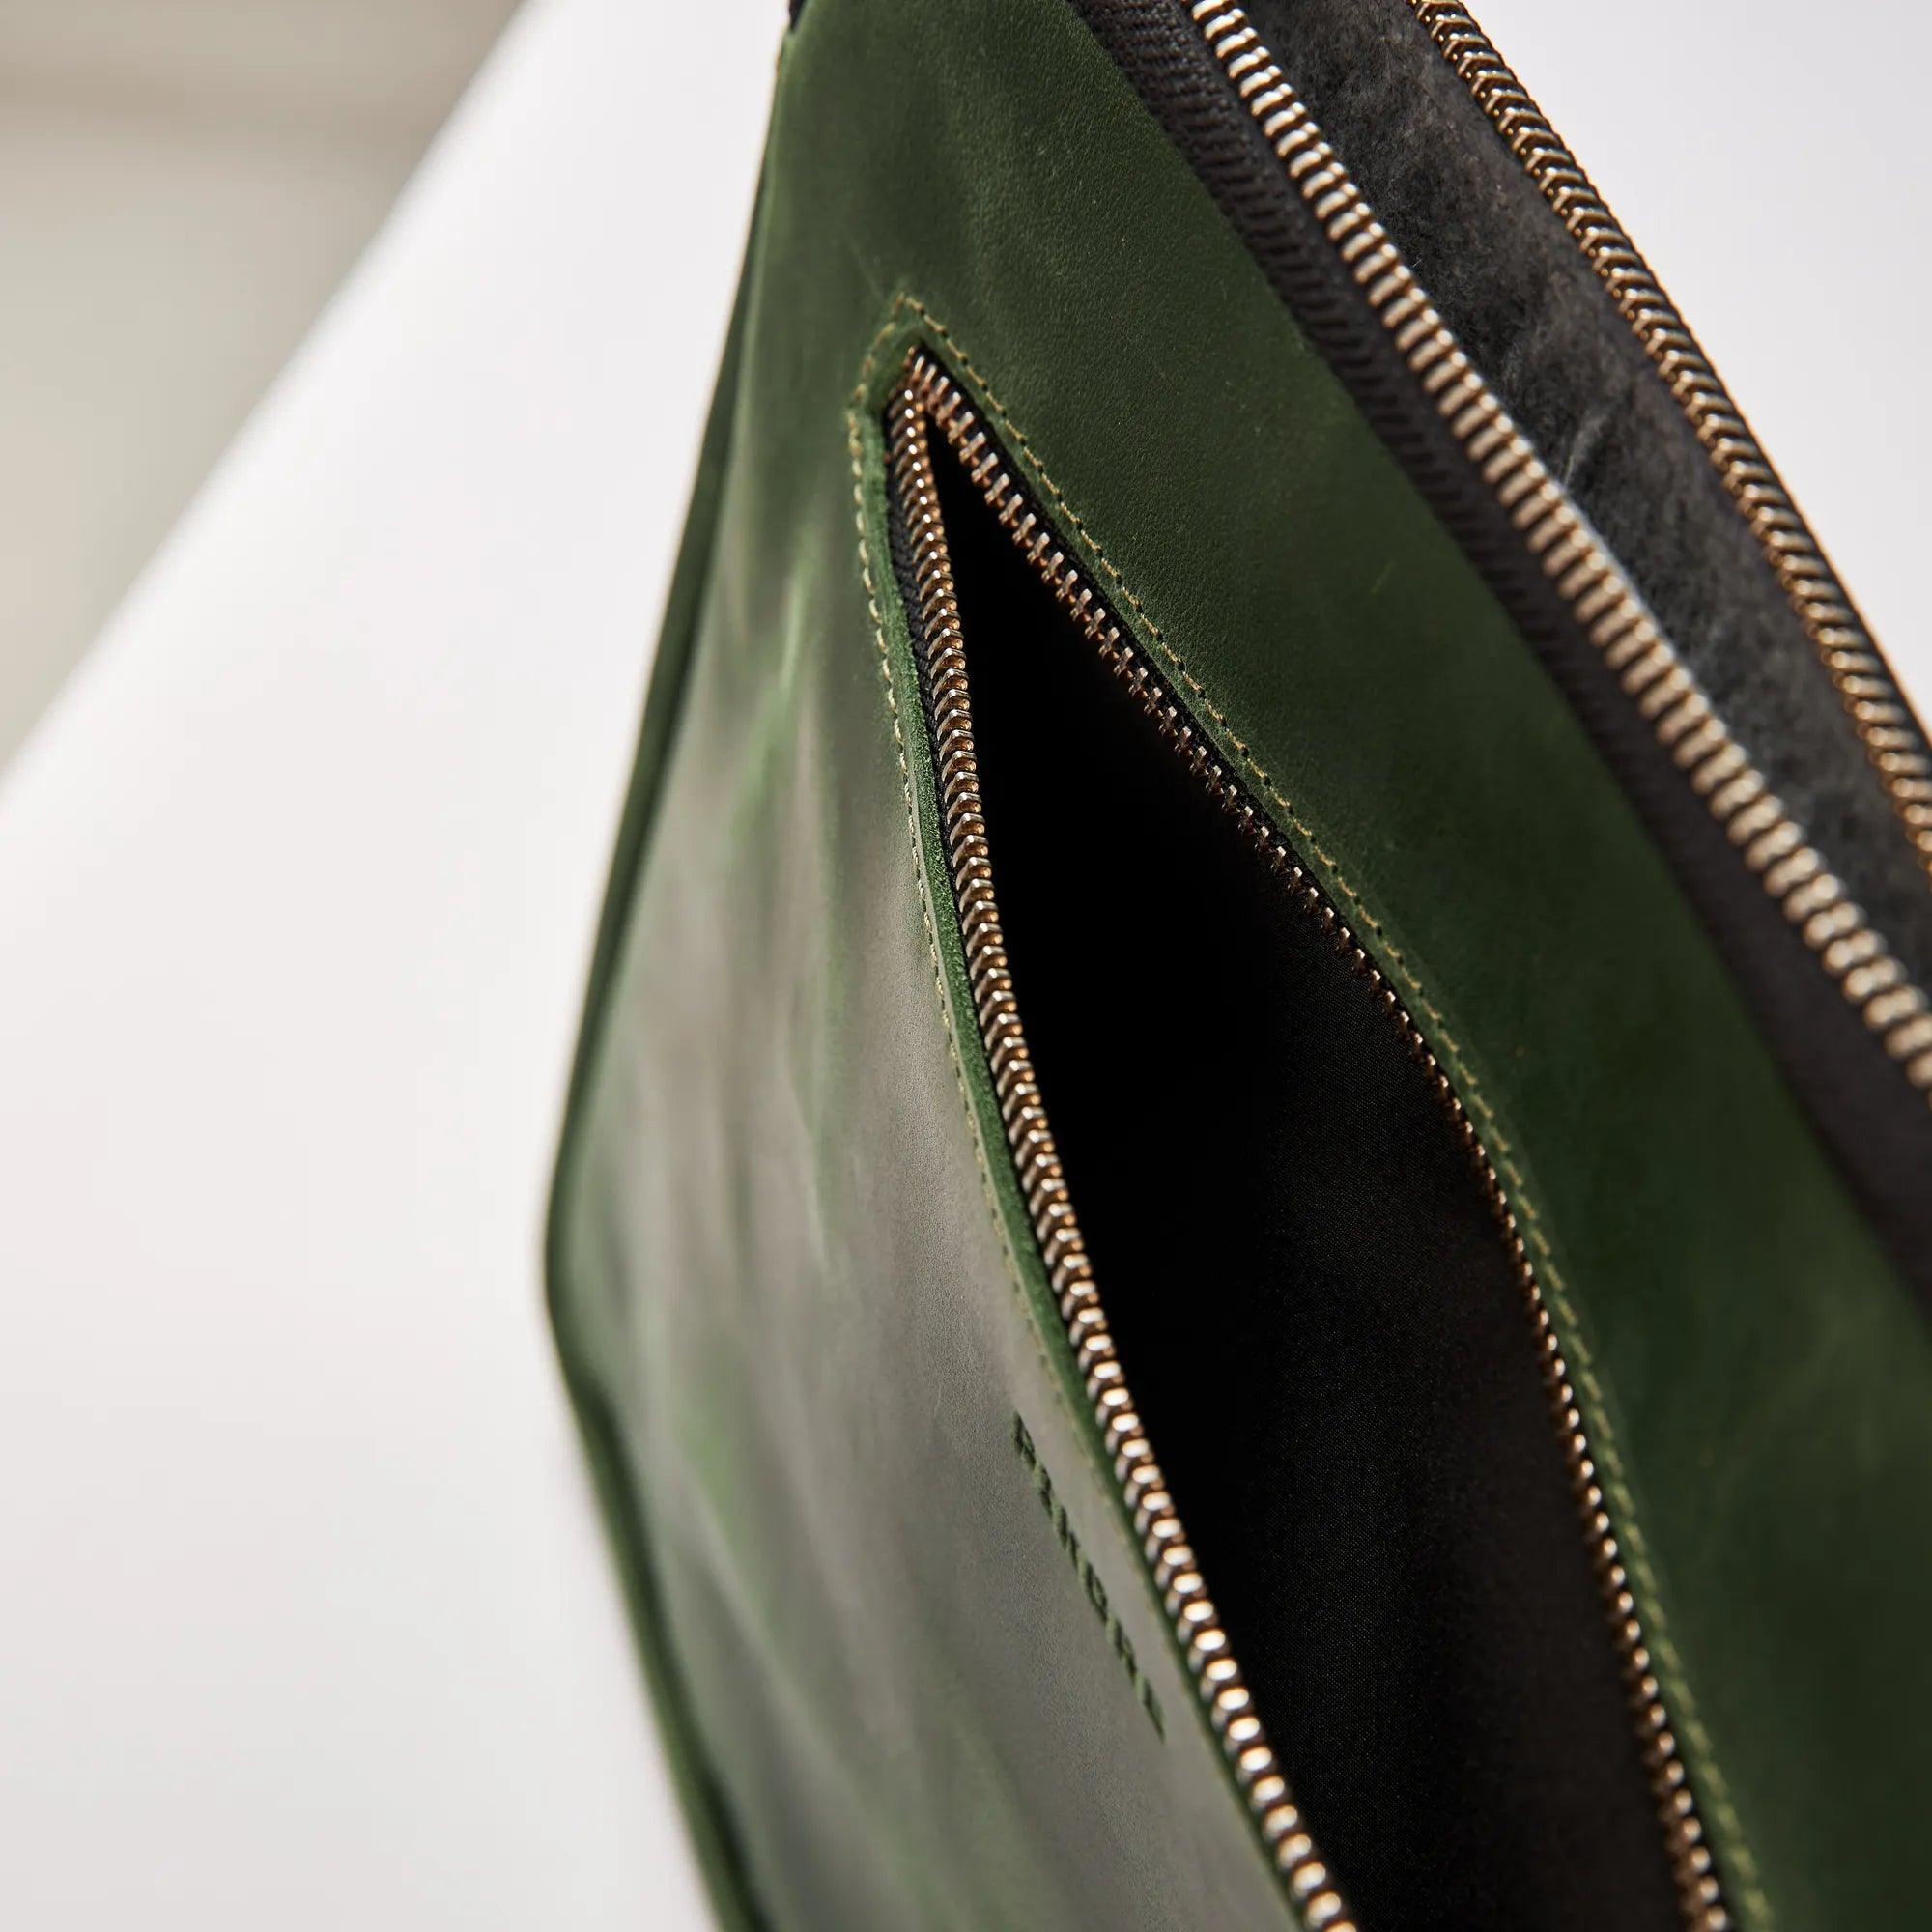 Leather Macbook Sleeve with Zipper - Pikore